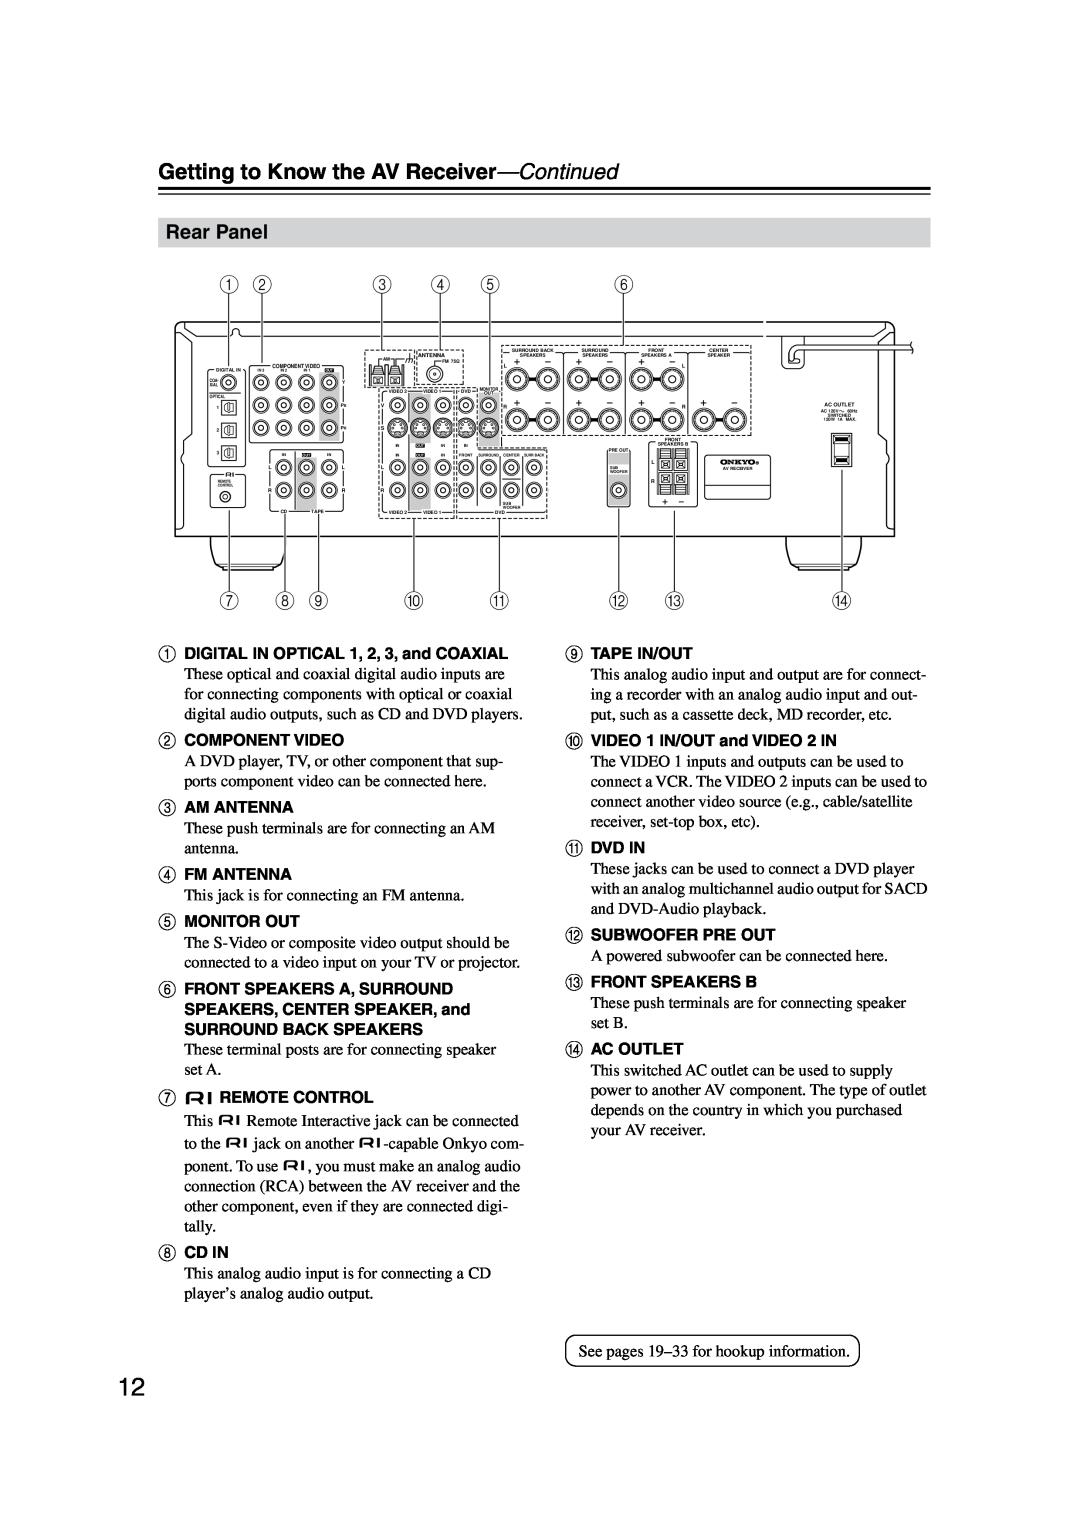 Onkyo HT-S990THX instruction manual Rear Panel, Getting to Know the AV Receiver-Continued 